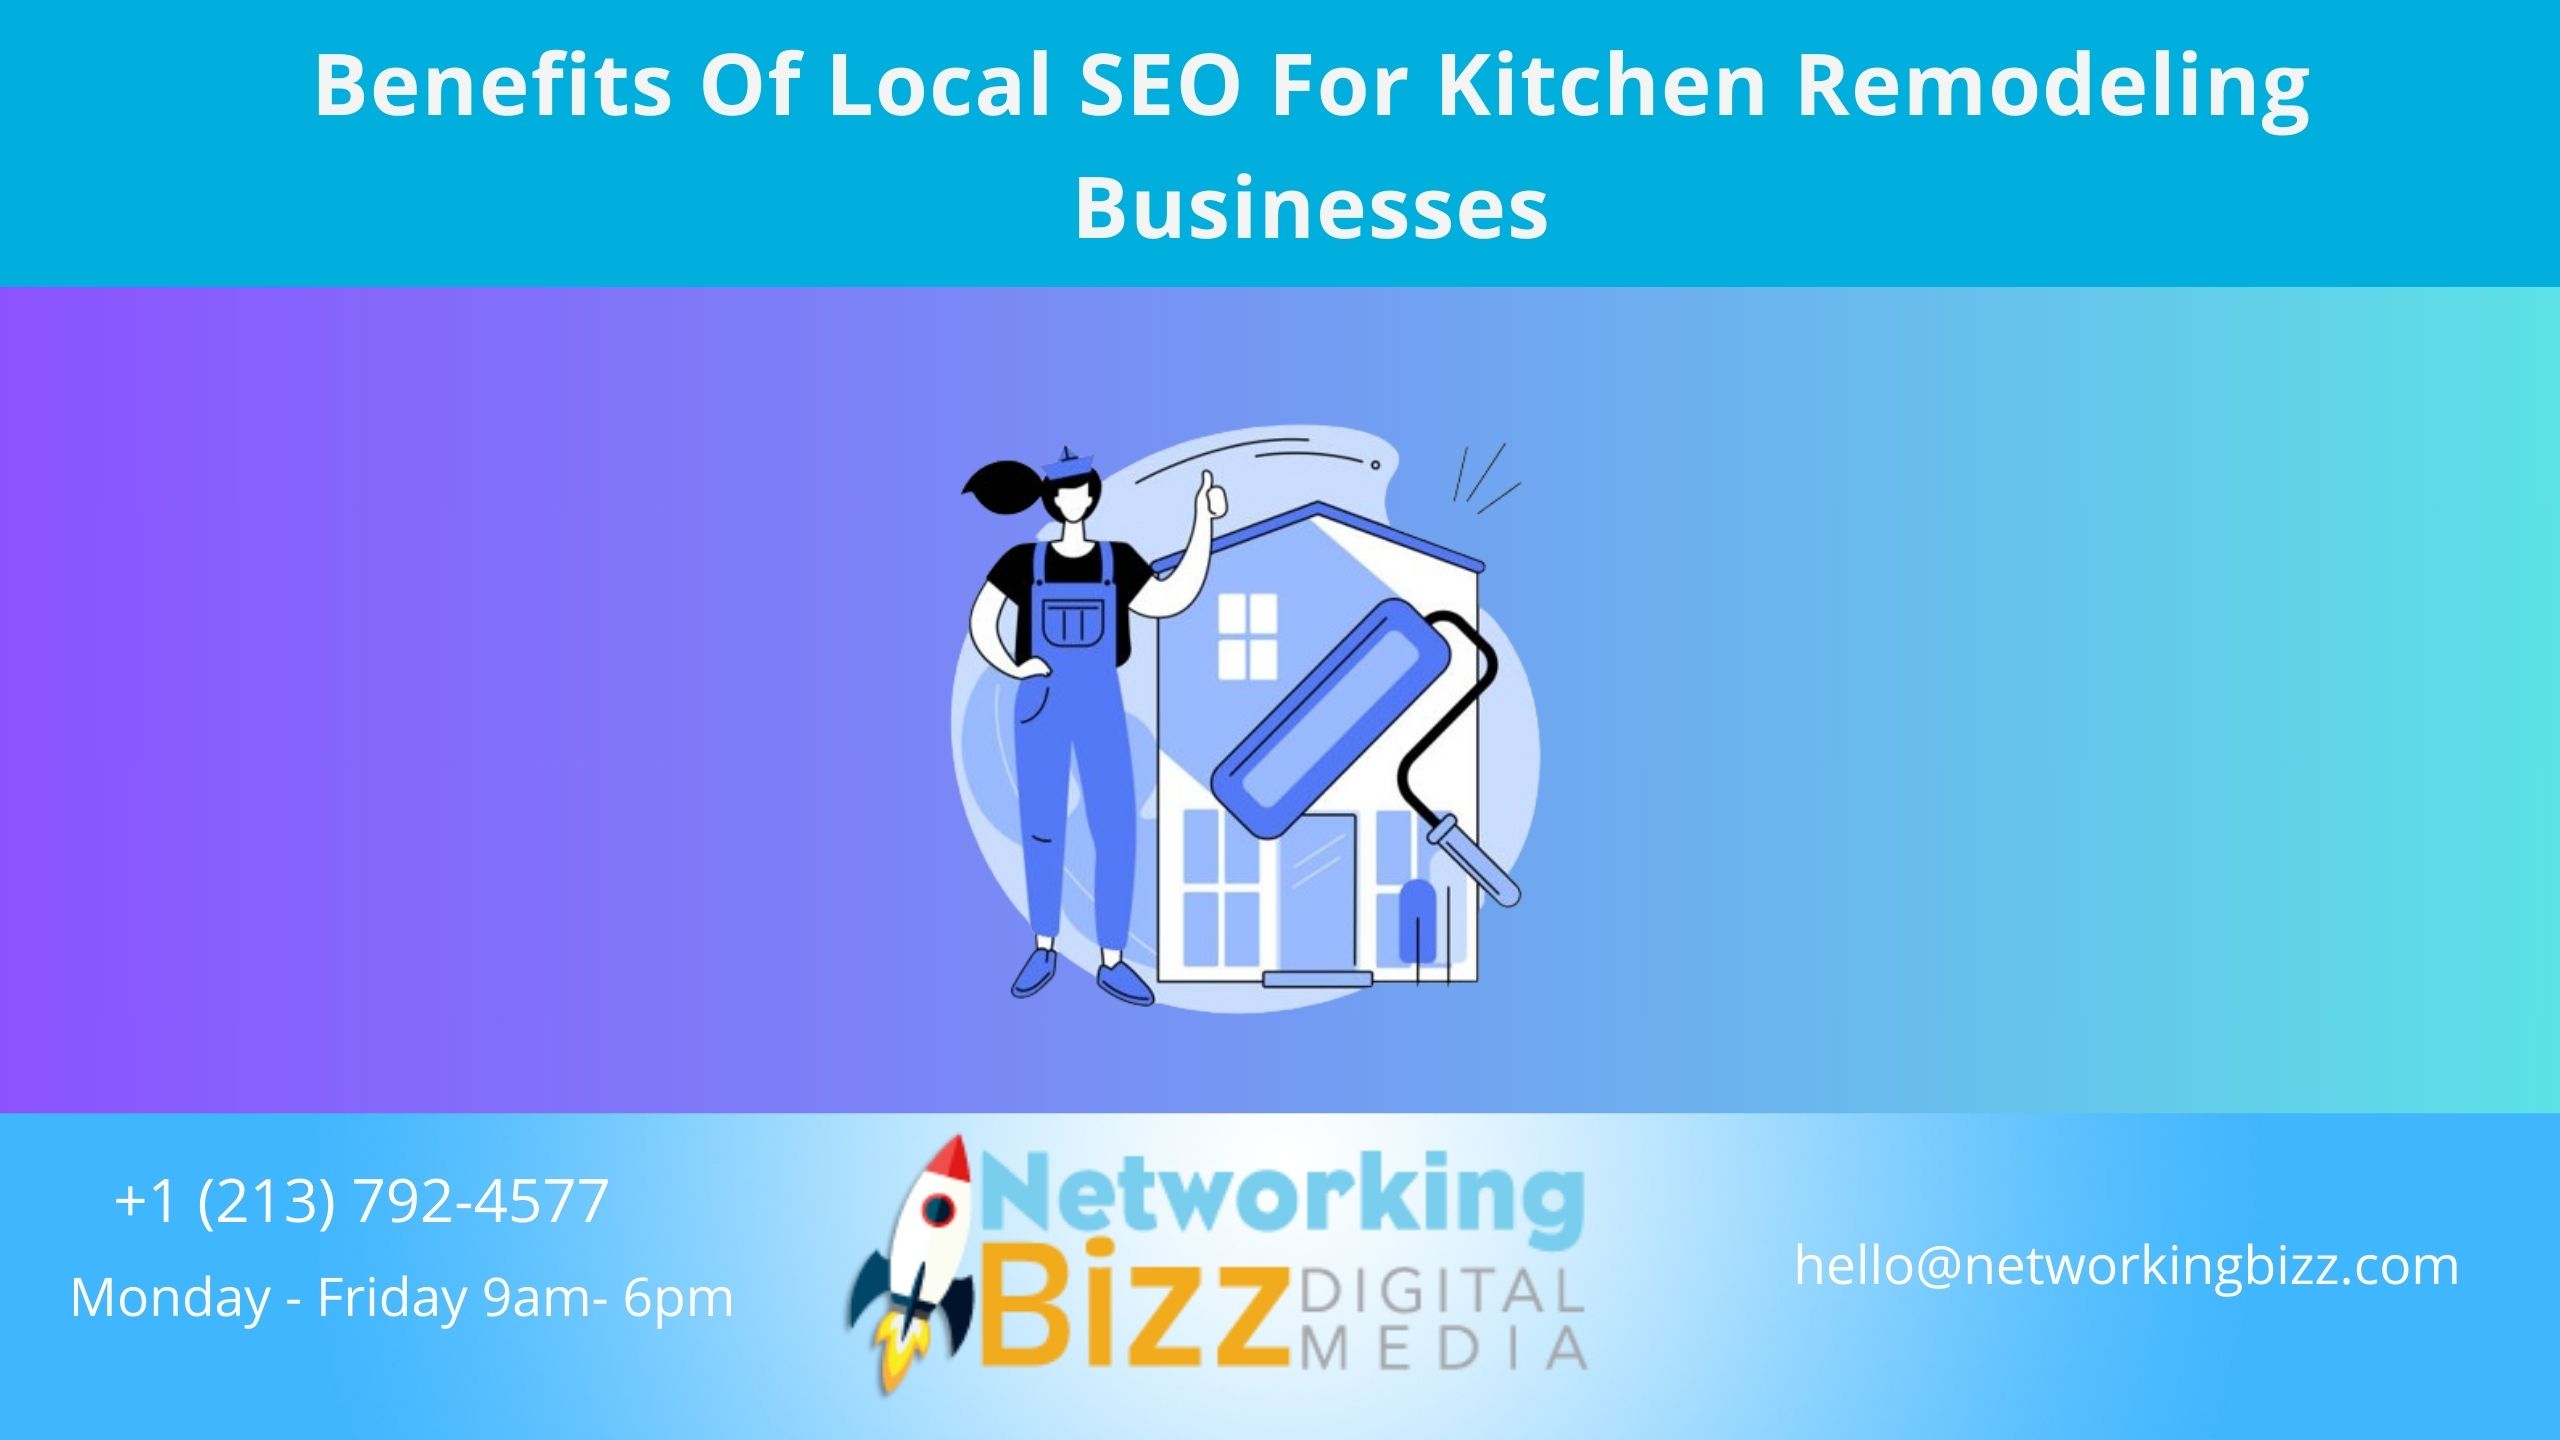 Benefits Of Local SEO For Kitchen Remodeling Businesses